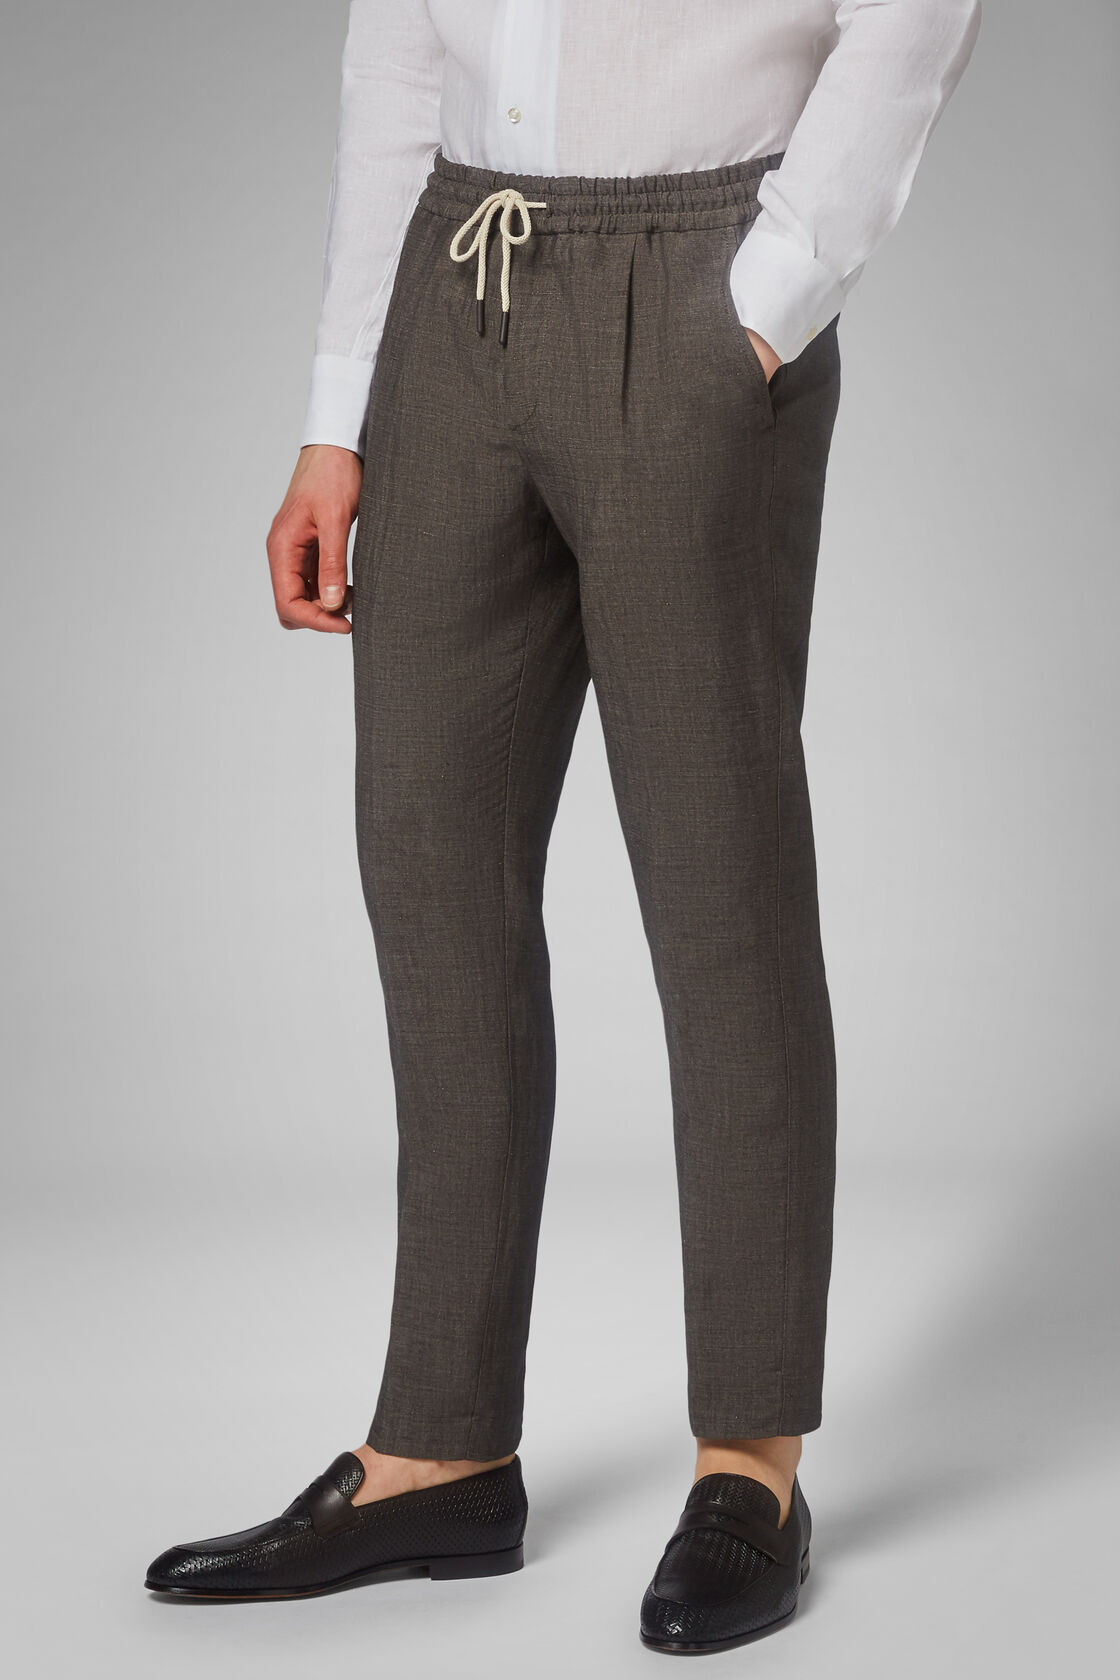 Linen/Tencel Trousers With Drawcord, , hi-res